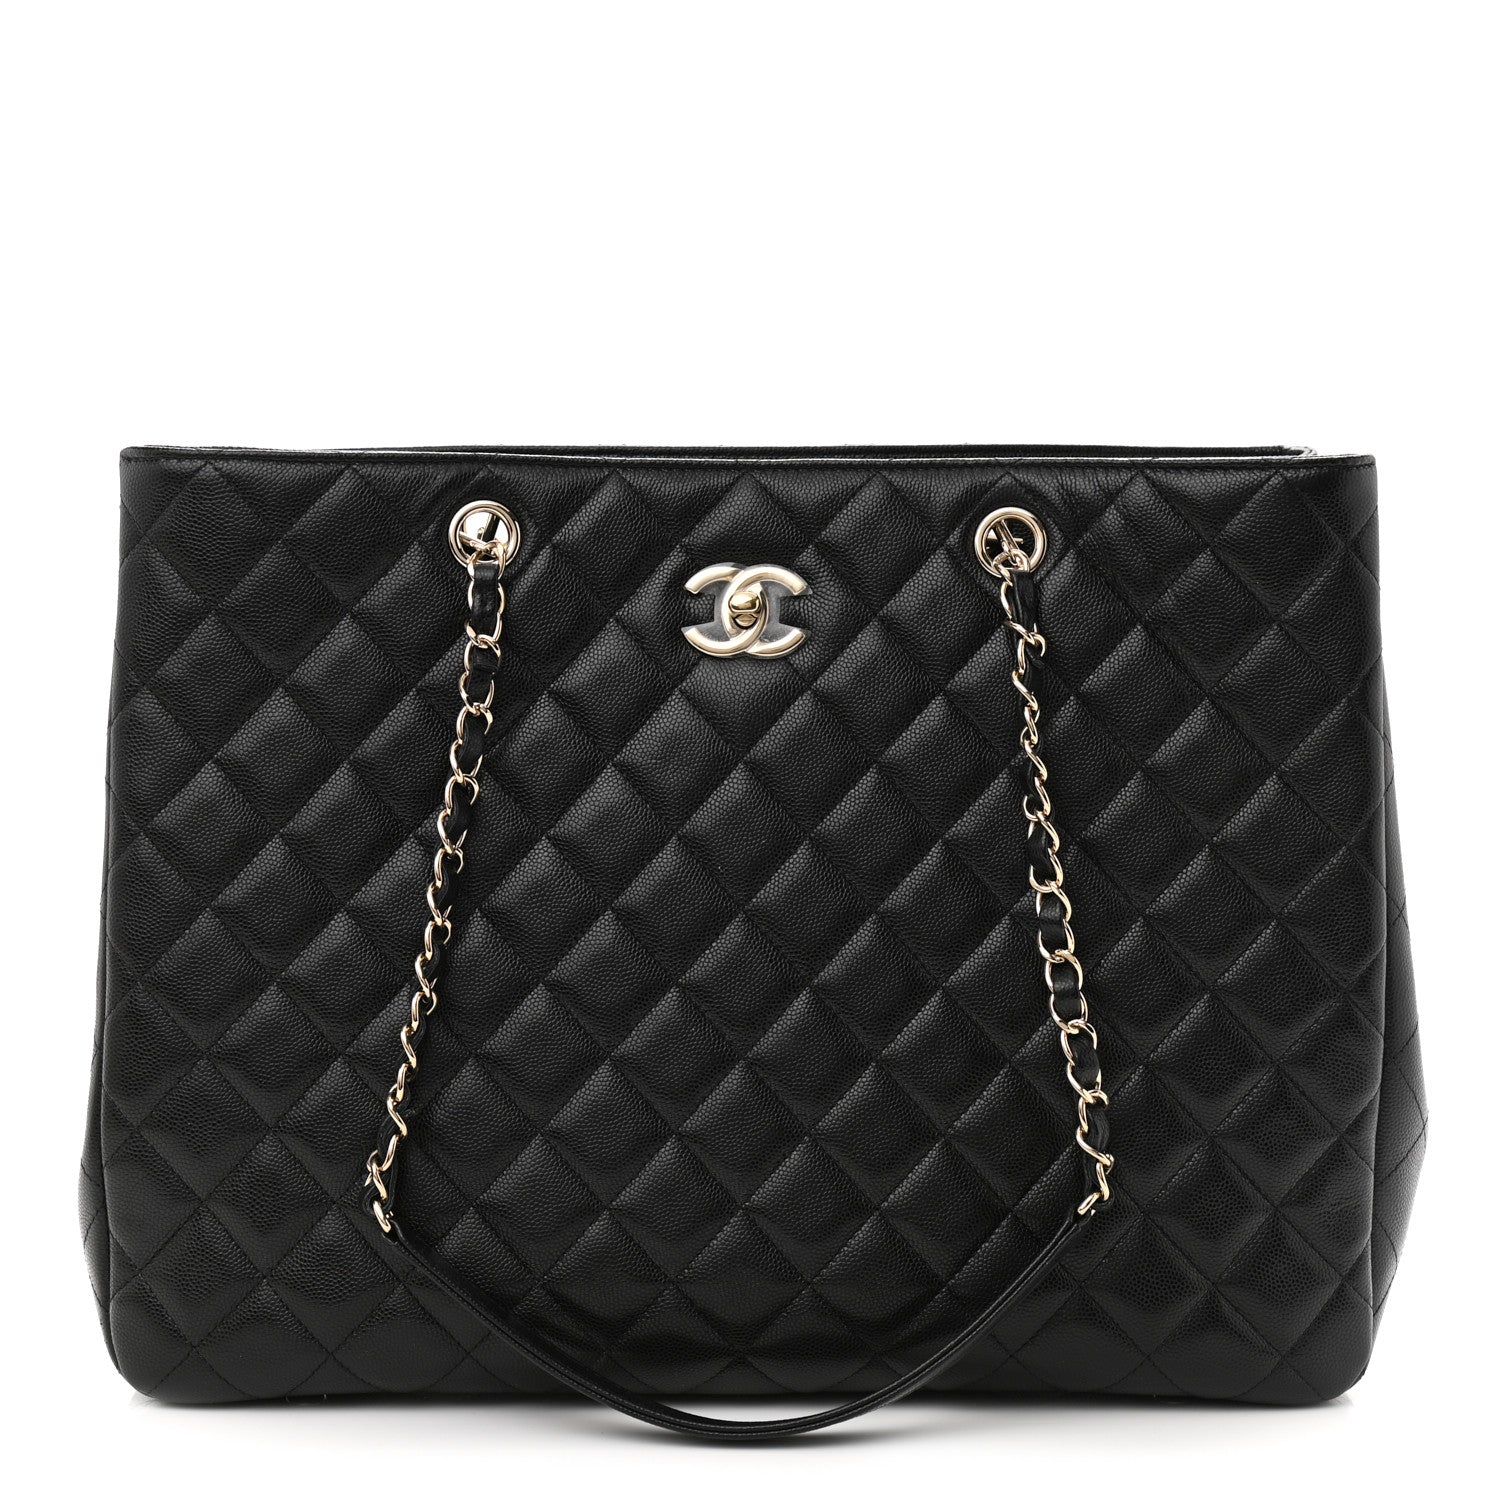 Chanel - Authenticated Grand Shopping Handbag - Leather Black for Women, Very Good Condition